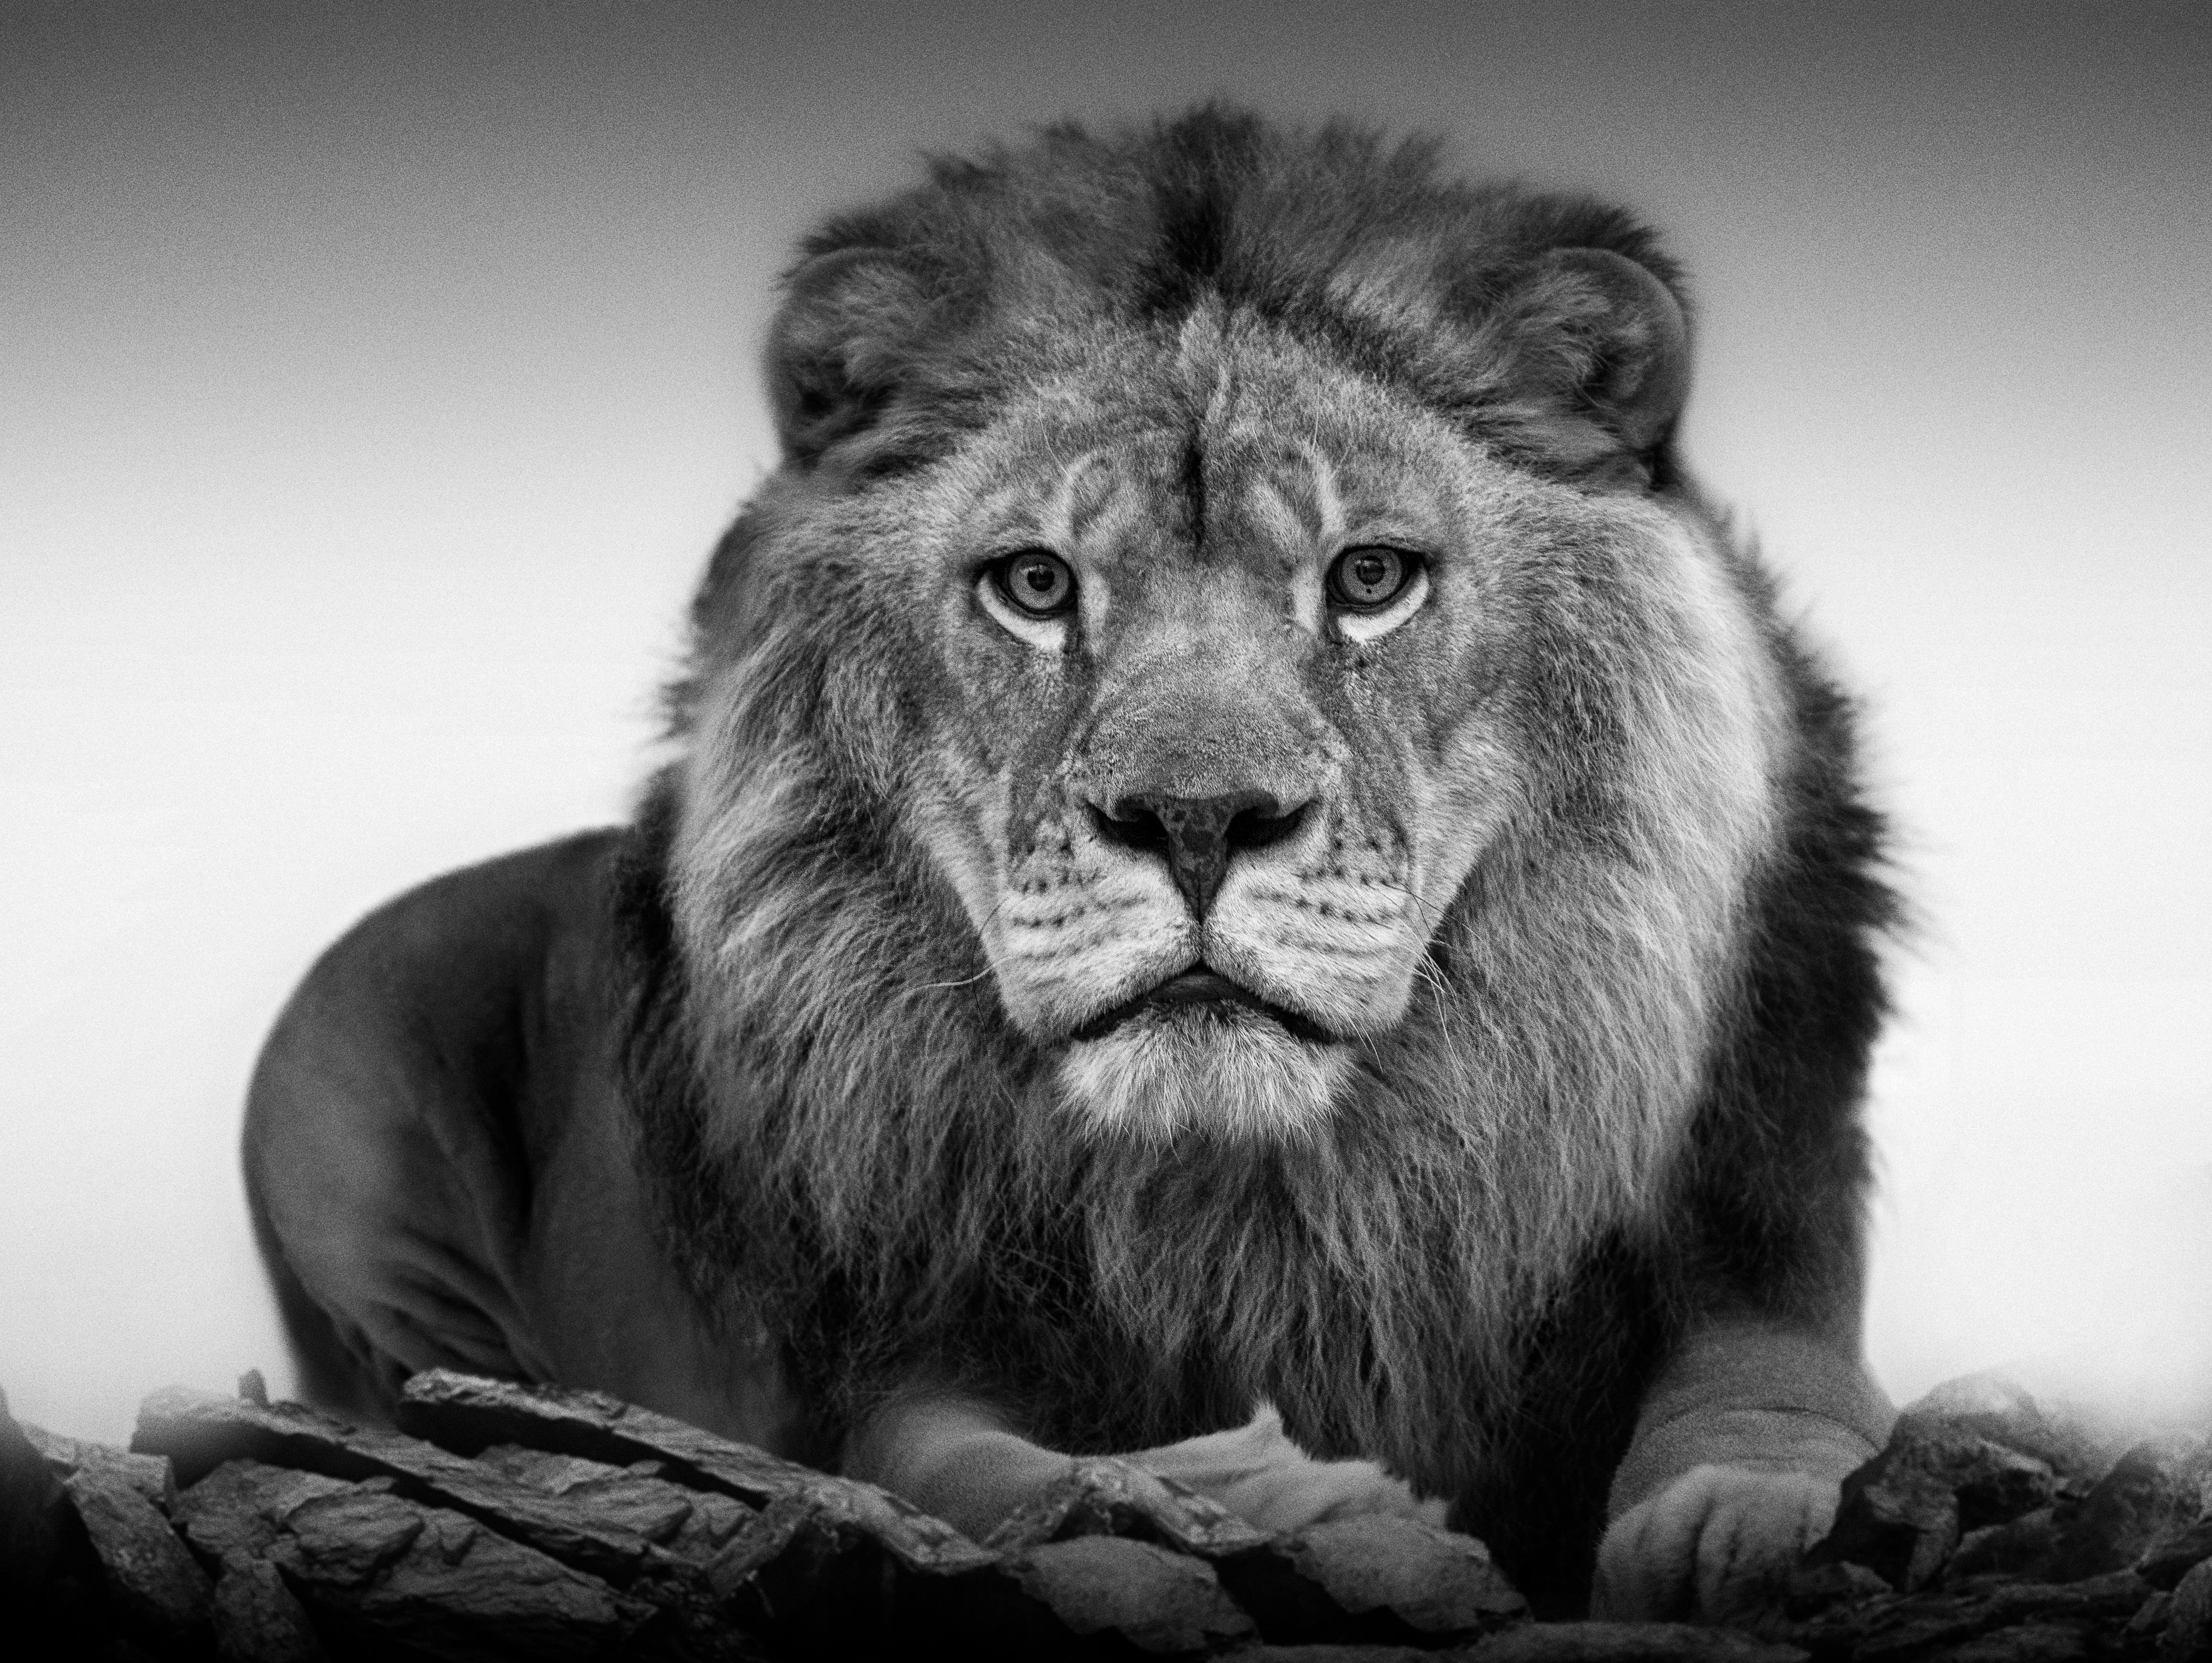 Shane Russeck Black and White Photograph - 40x60 "Lion Portrait"  Black and White Lion Photography, Photograph Unsigned Art